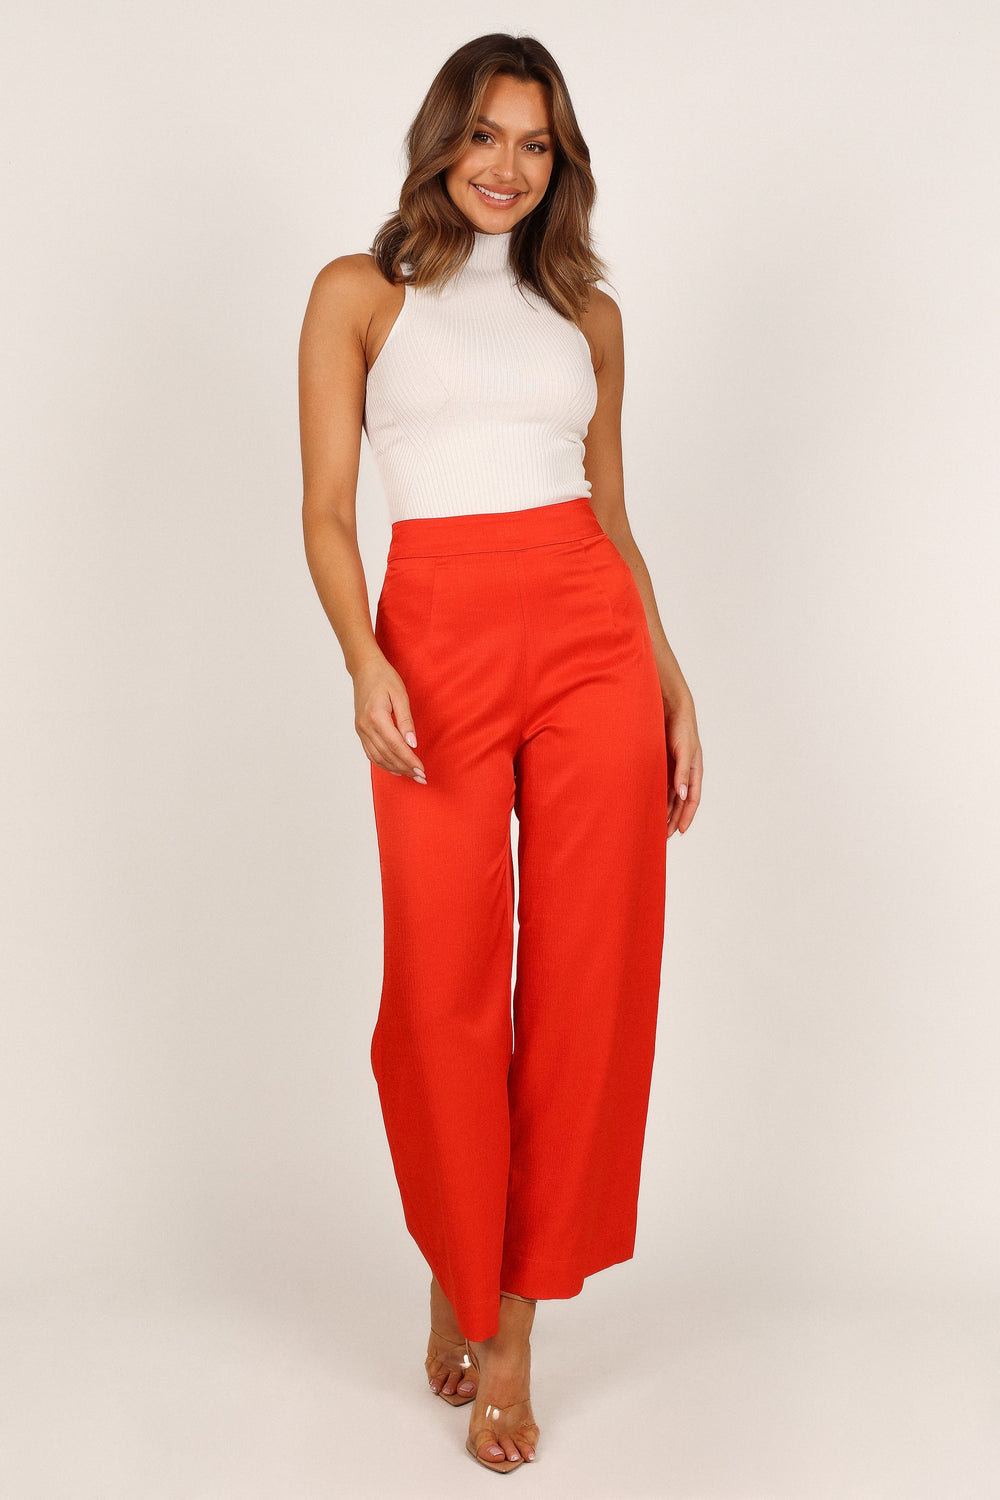 Buy Heymoments Women's Wide Leg Lounge Pants with Pockets Lightweight High  Waisted Adjustable Tie Knot Loose Trousers, A09-rust Red, Large at Amazon.in